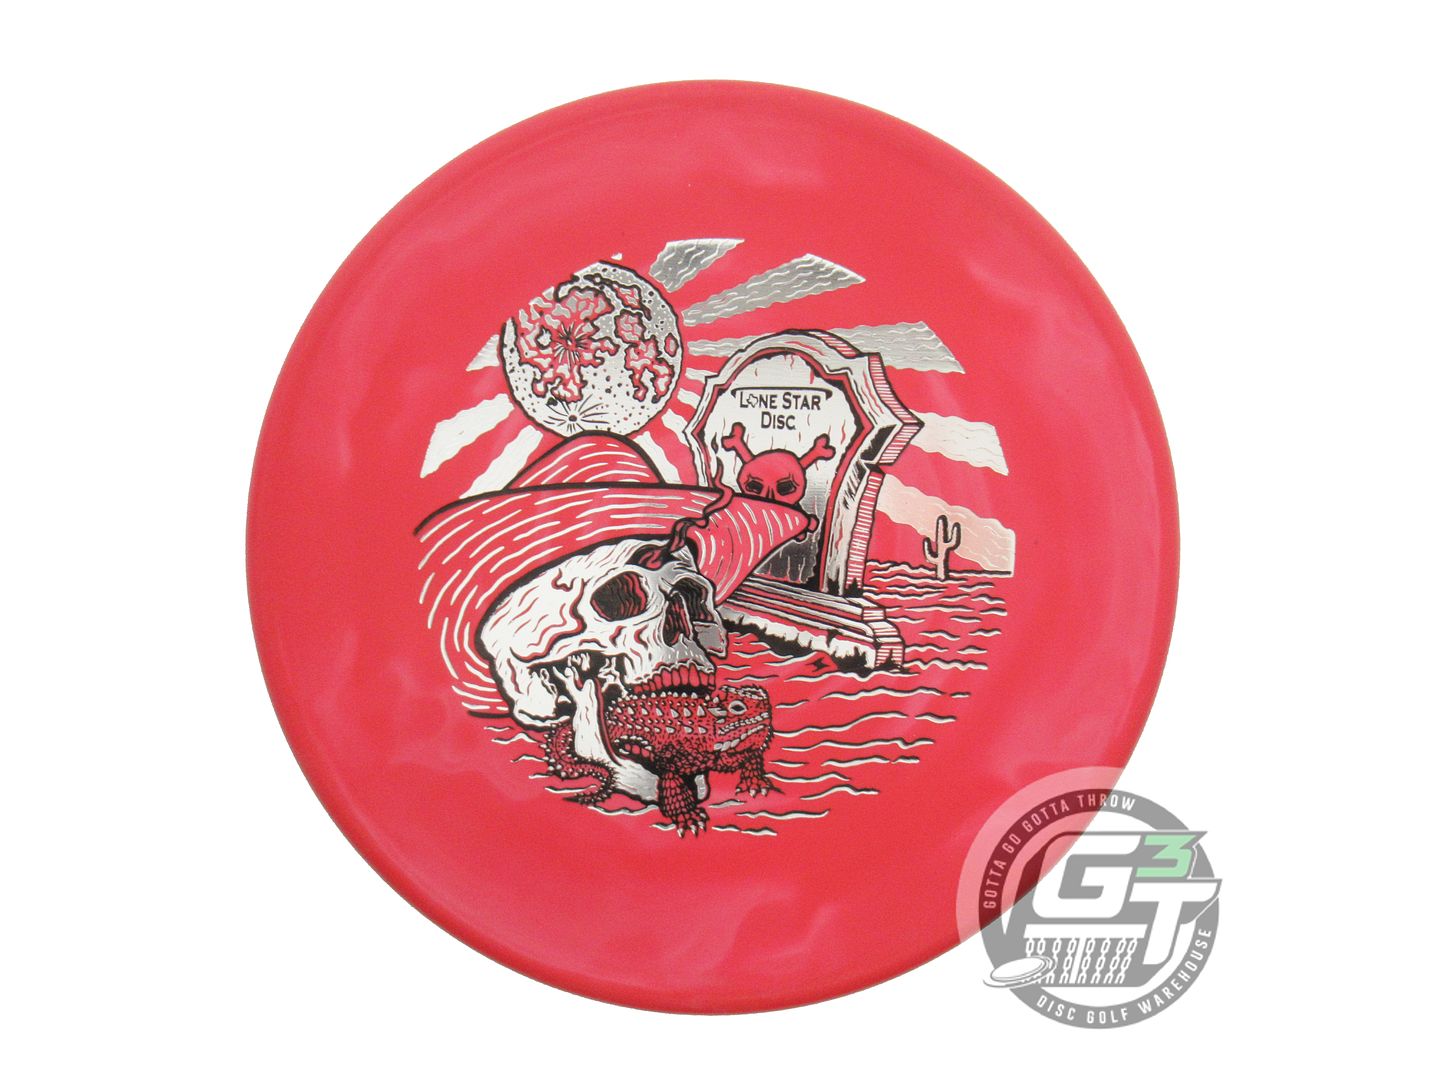 Lone Star Artist Series Delta 2 Horny Toad Putter Golf Disc (Individually Listed)